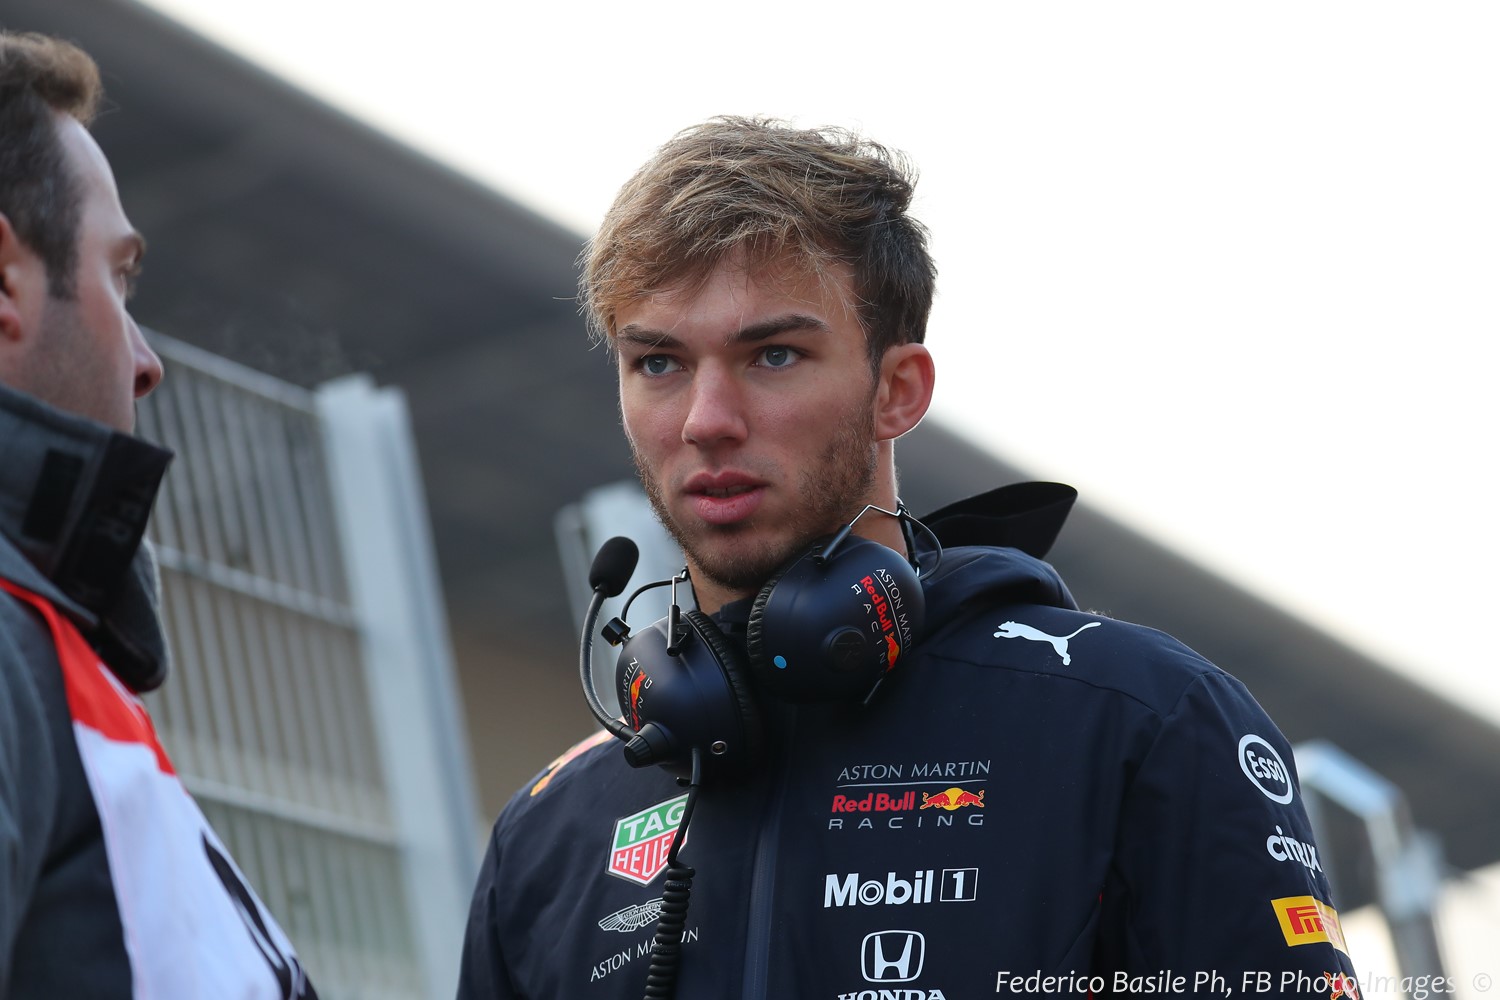 Gasly has glum look on his face as he sees his F1 career disappearing before his eyes